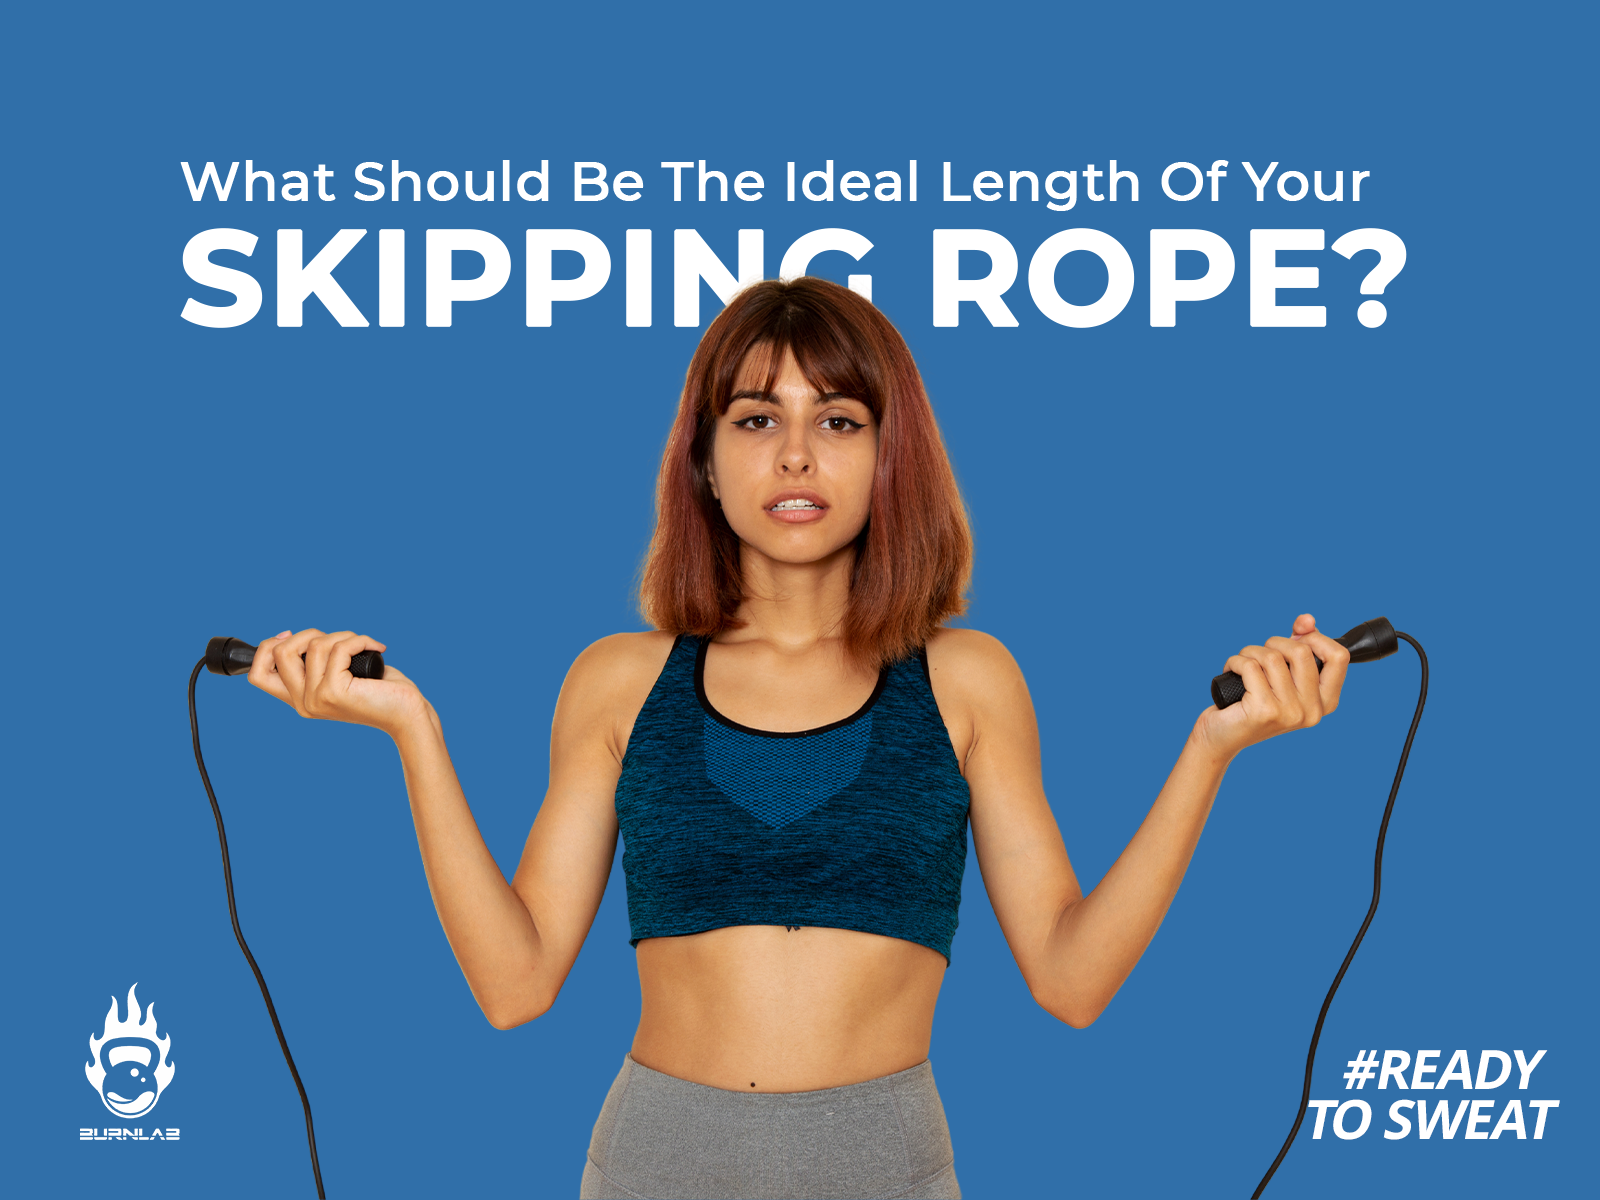 The Perfect Length Of Your Skipping Rope for Maximum Benefits